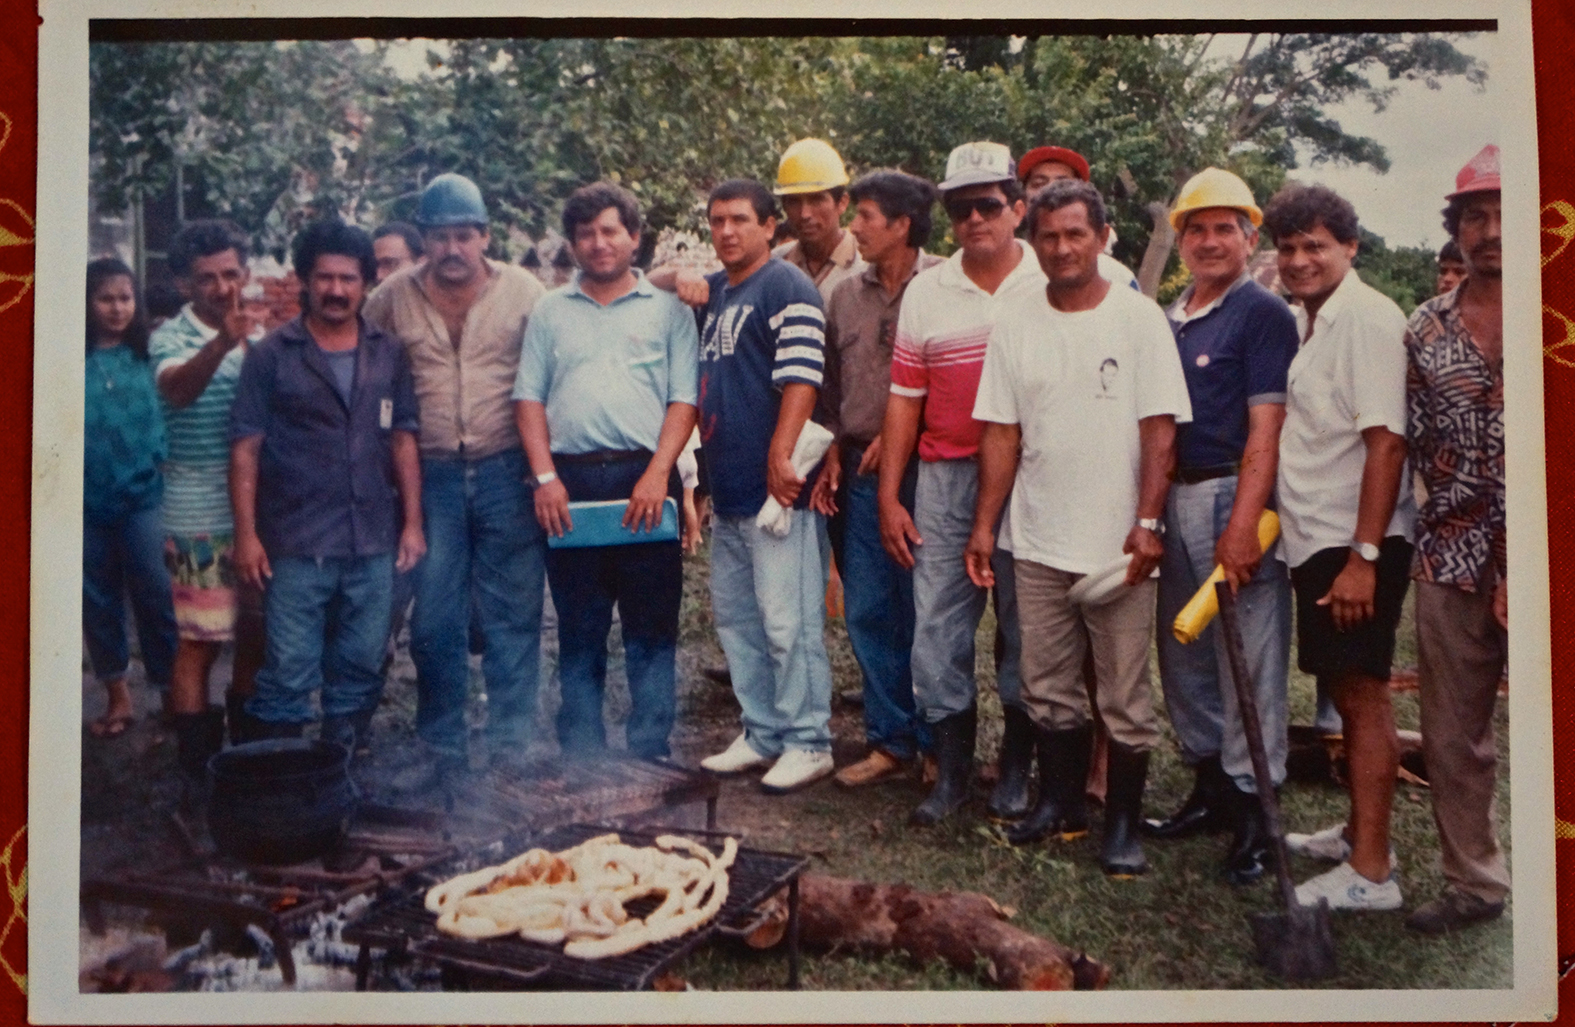 Trade Unionists eating asado during a factory meeting in the 1980s. Source: Desiderio Fernandez. Picture of the original by the author, 2016.